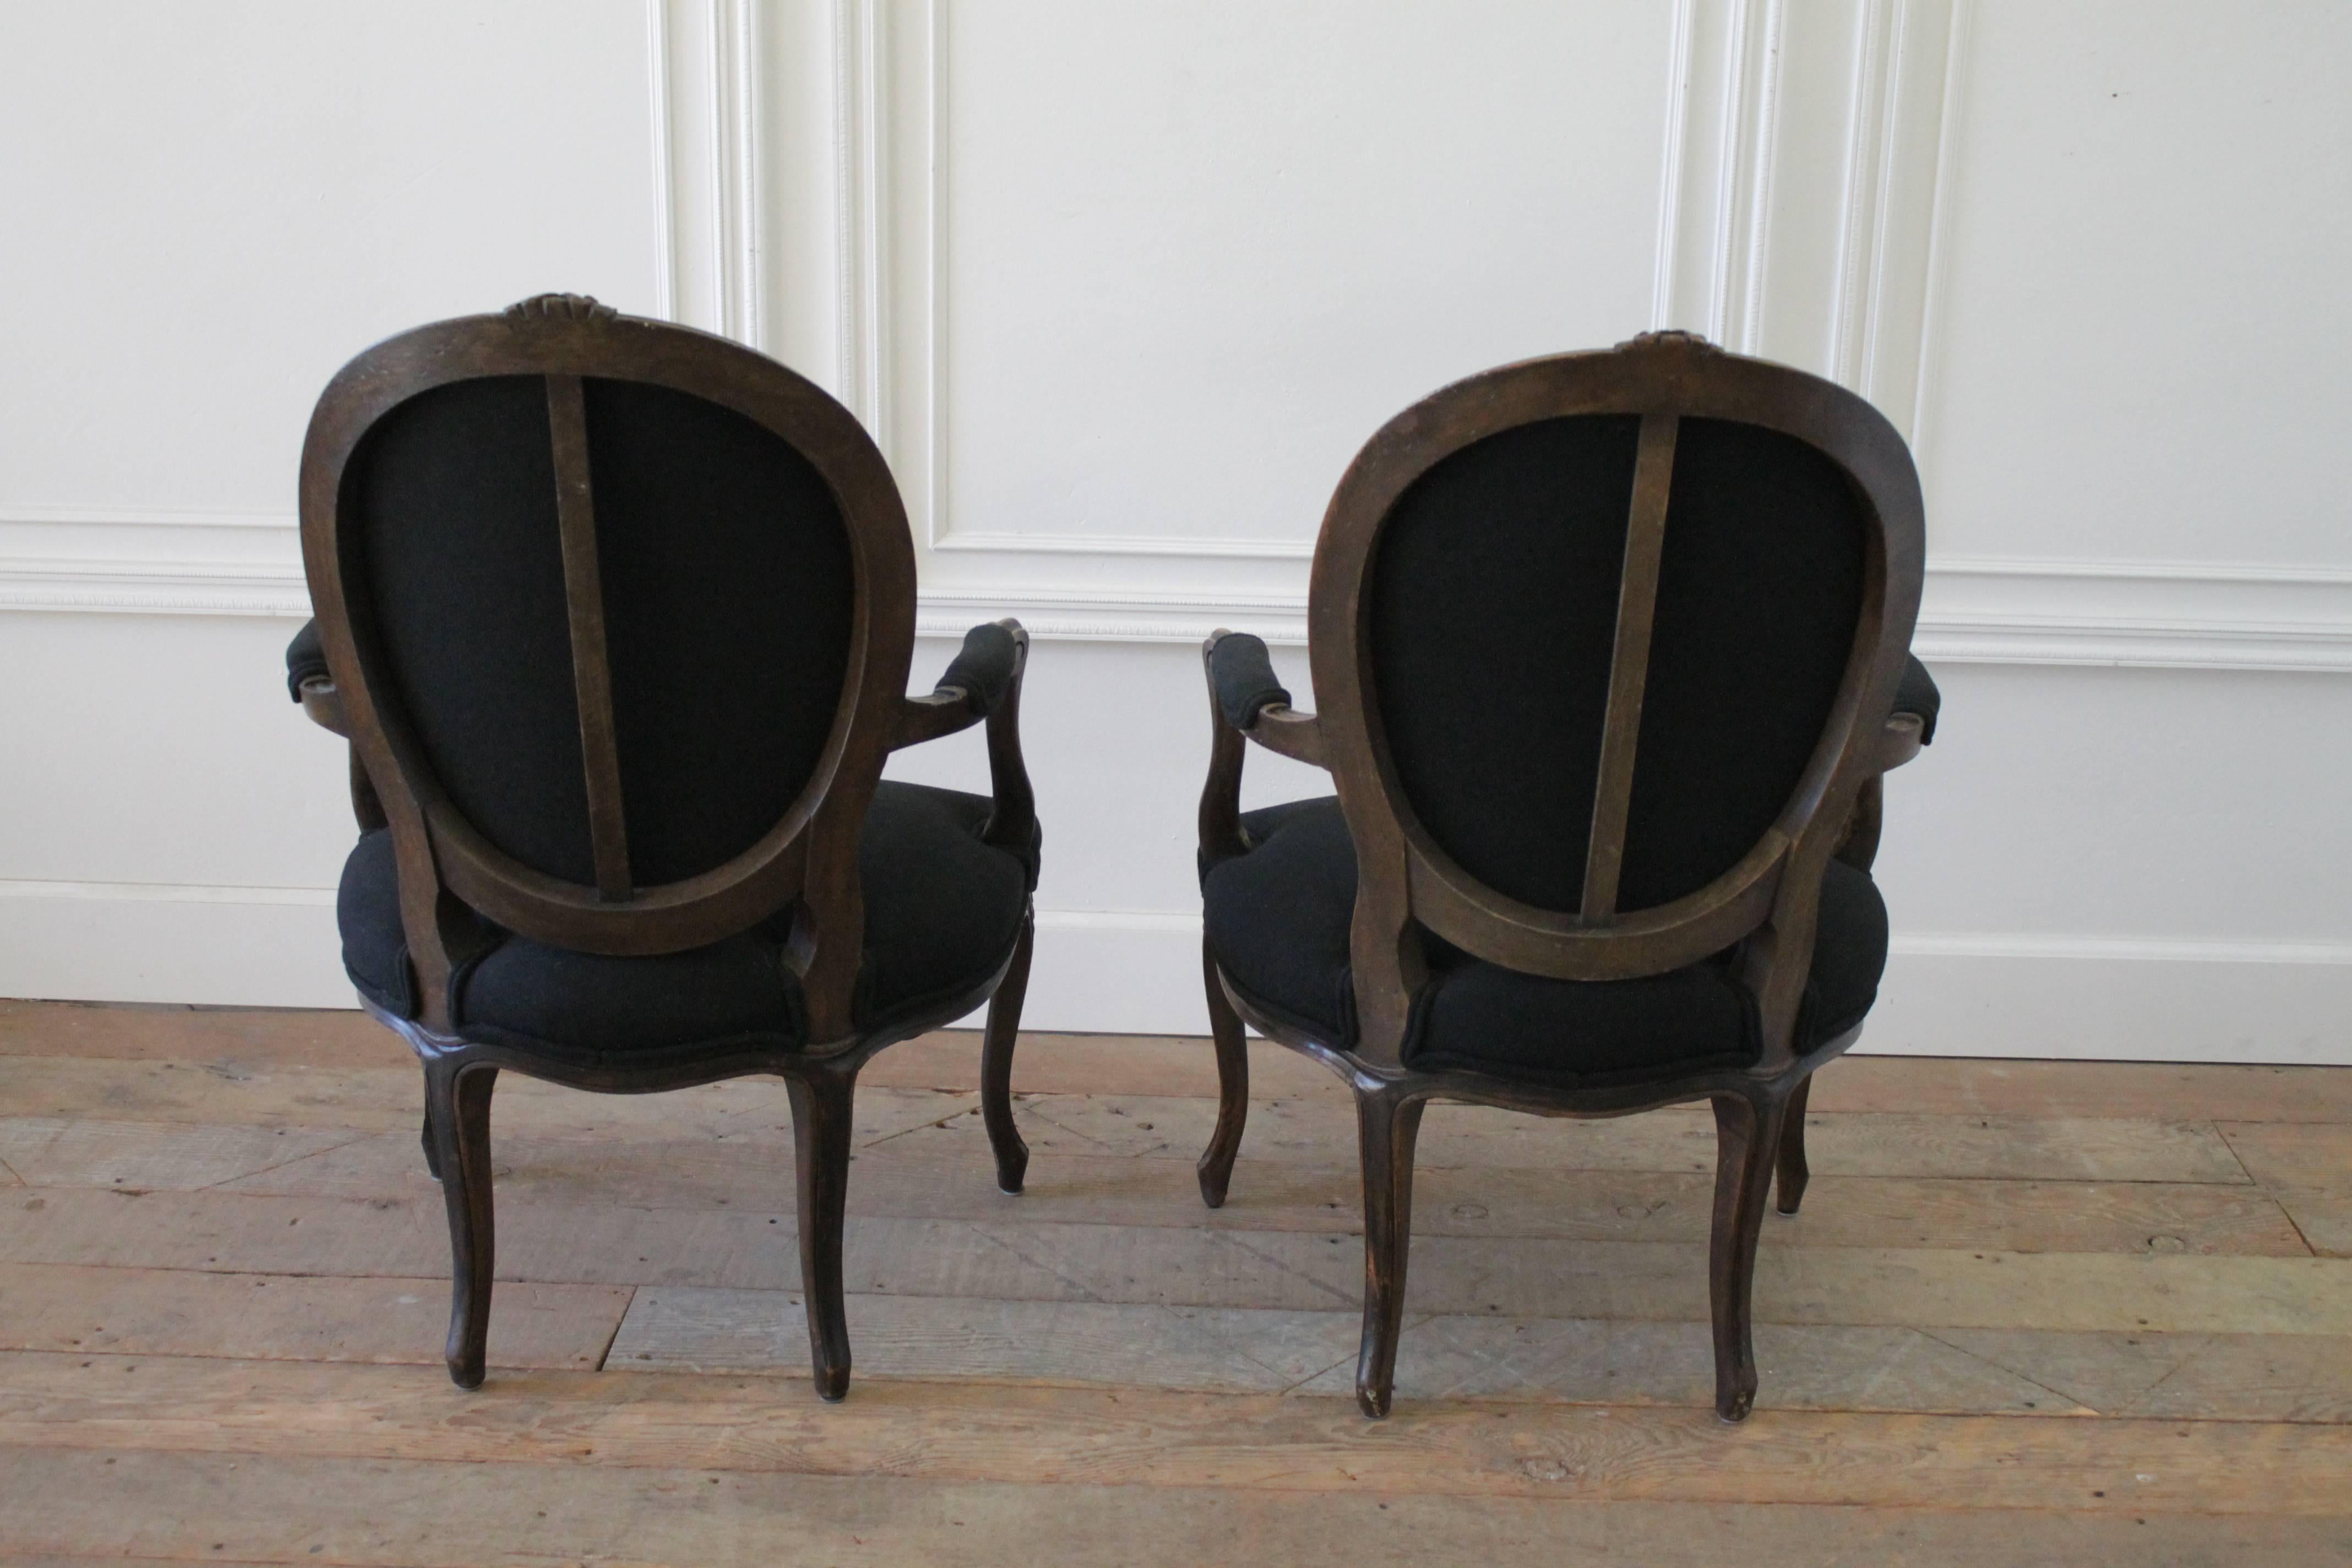 20th Century Pair of Walnut Fauteuils Louis XV Style Upholstered in Black Linen